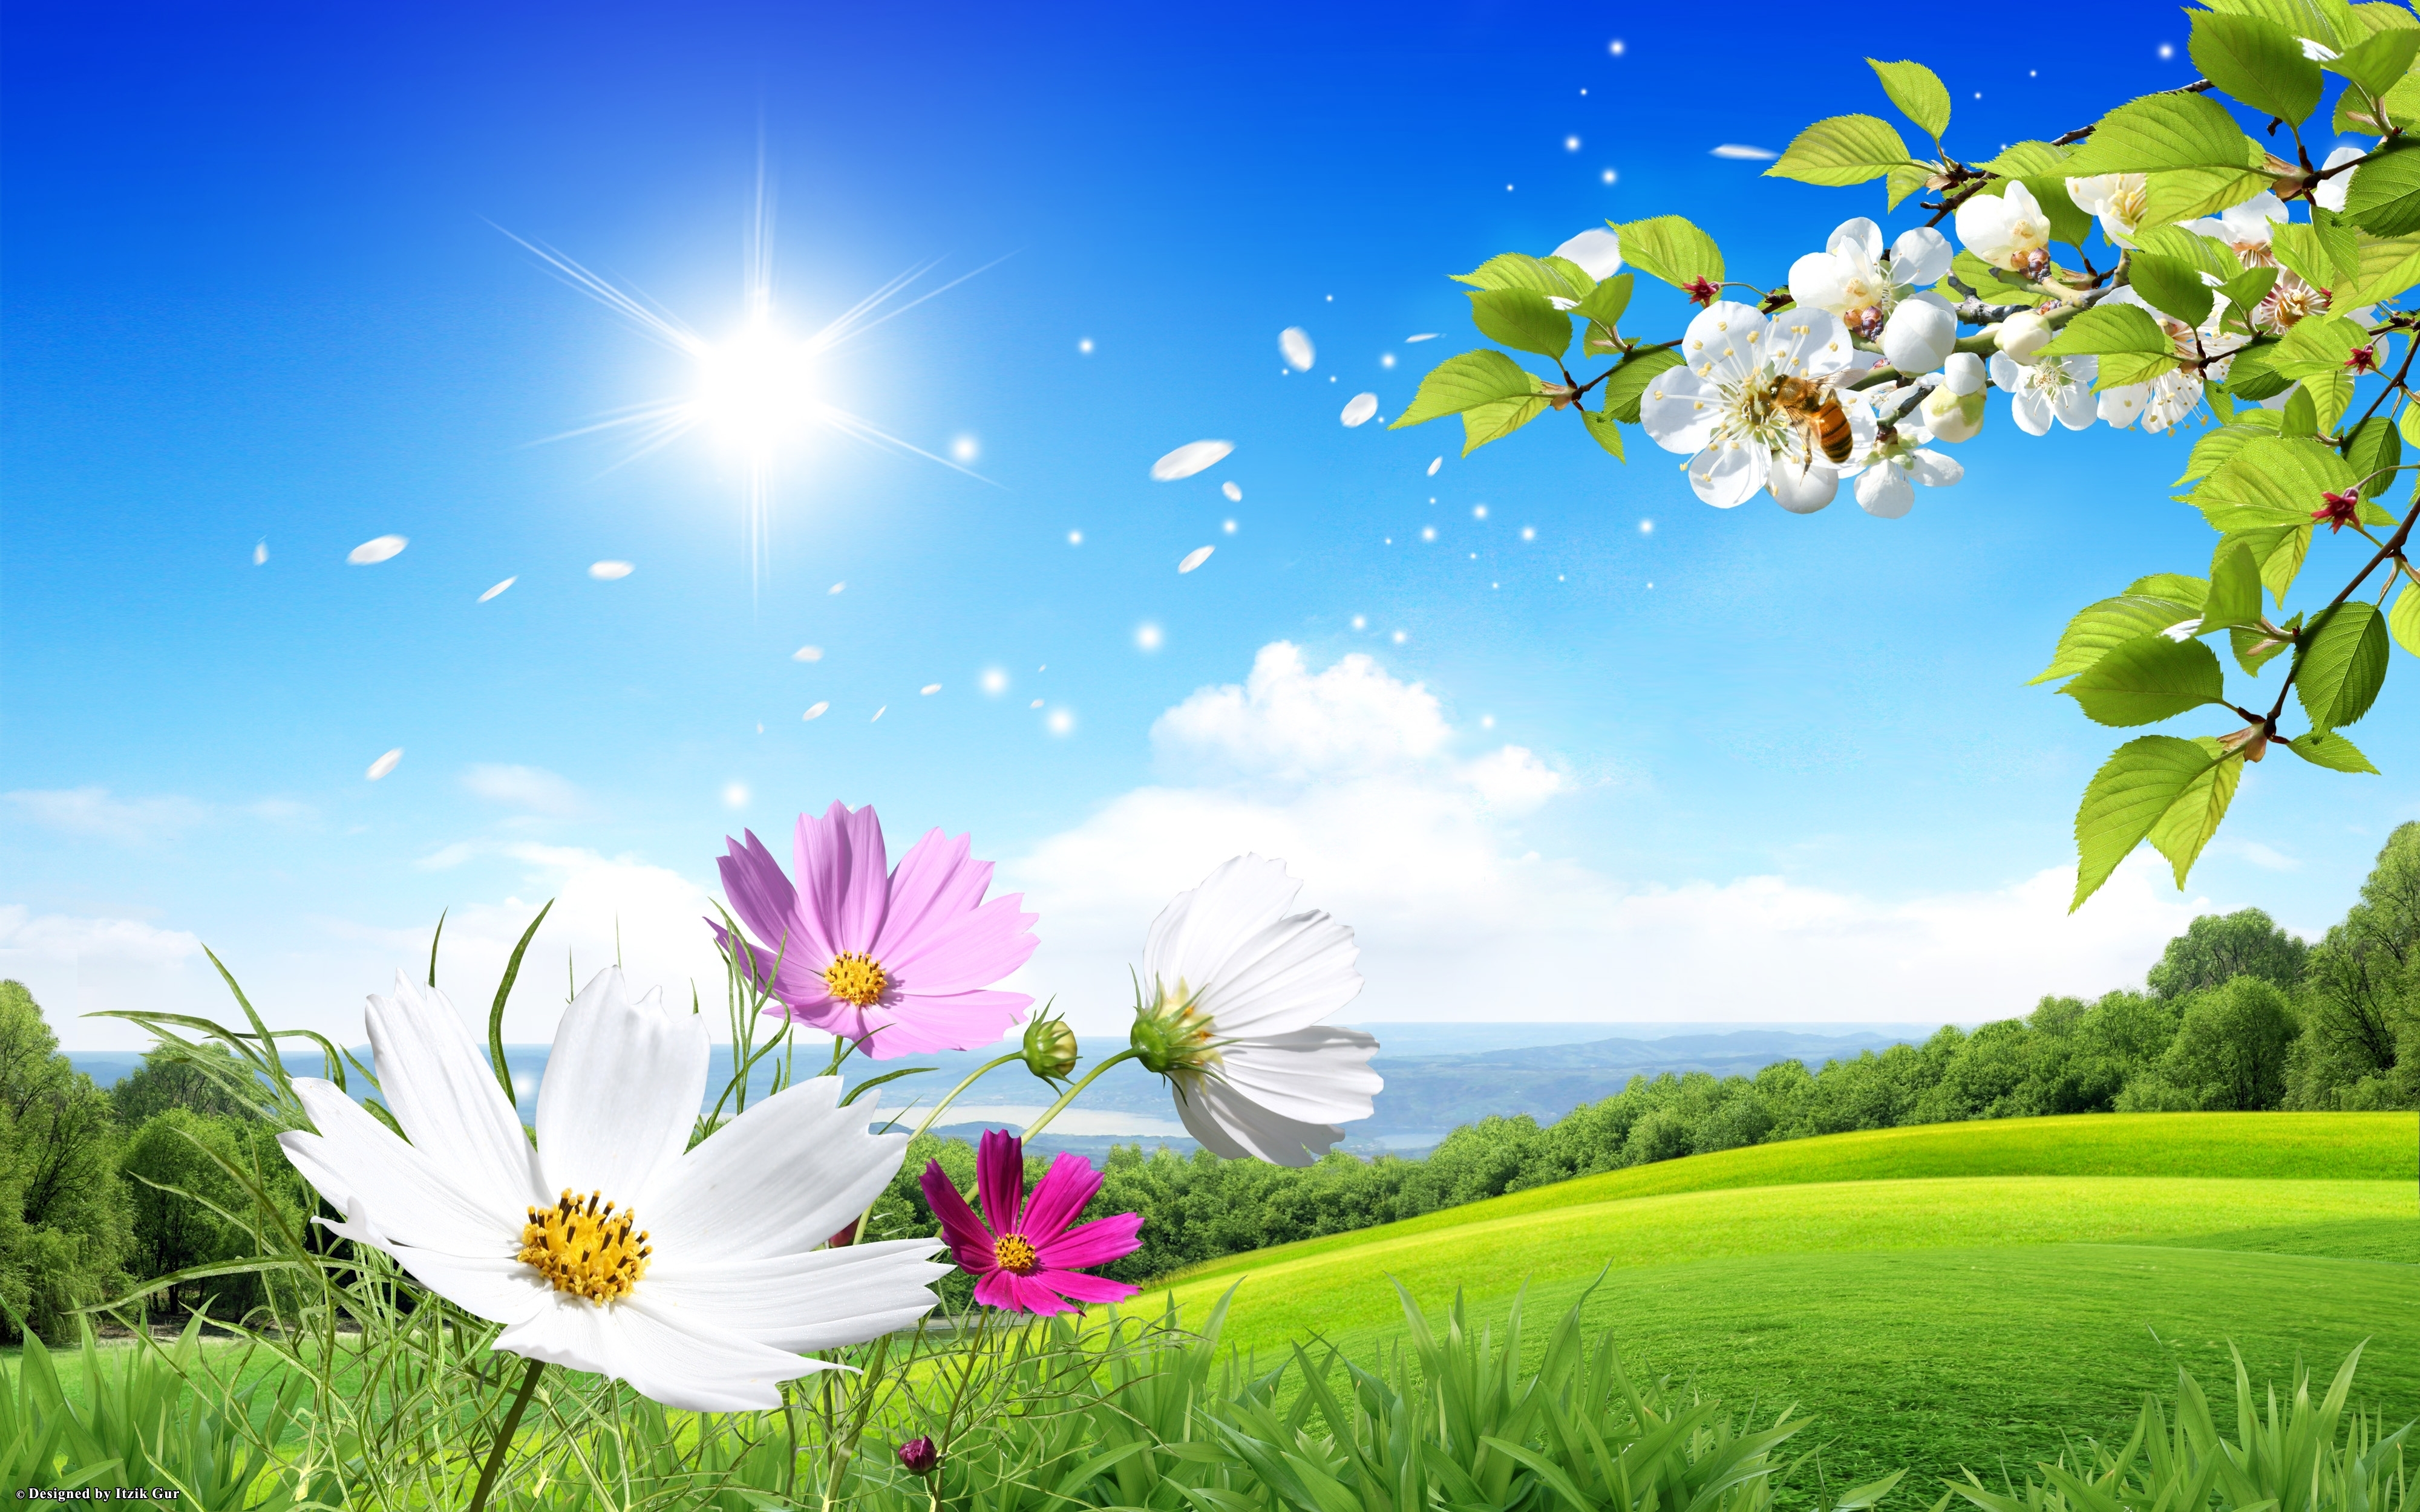 10 Latest Spring Nature Wallpapers High Resolution FULL HD 1080p For PC Desktop